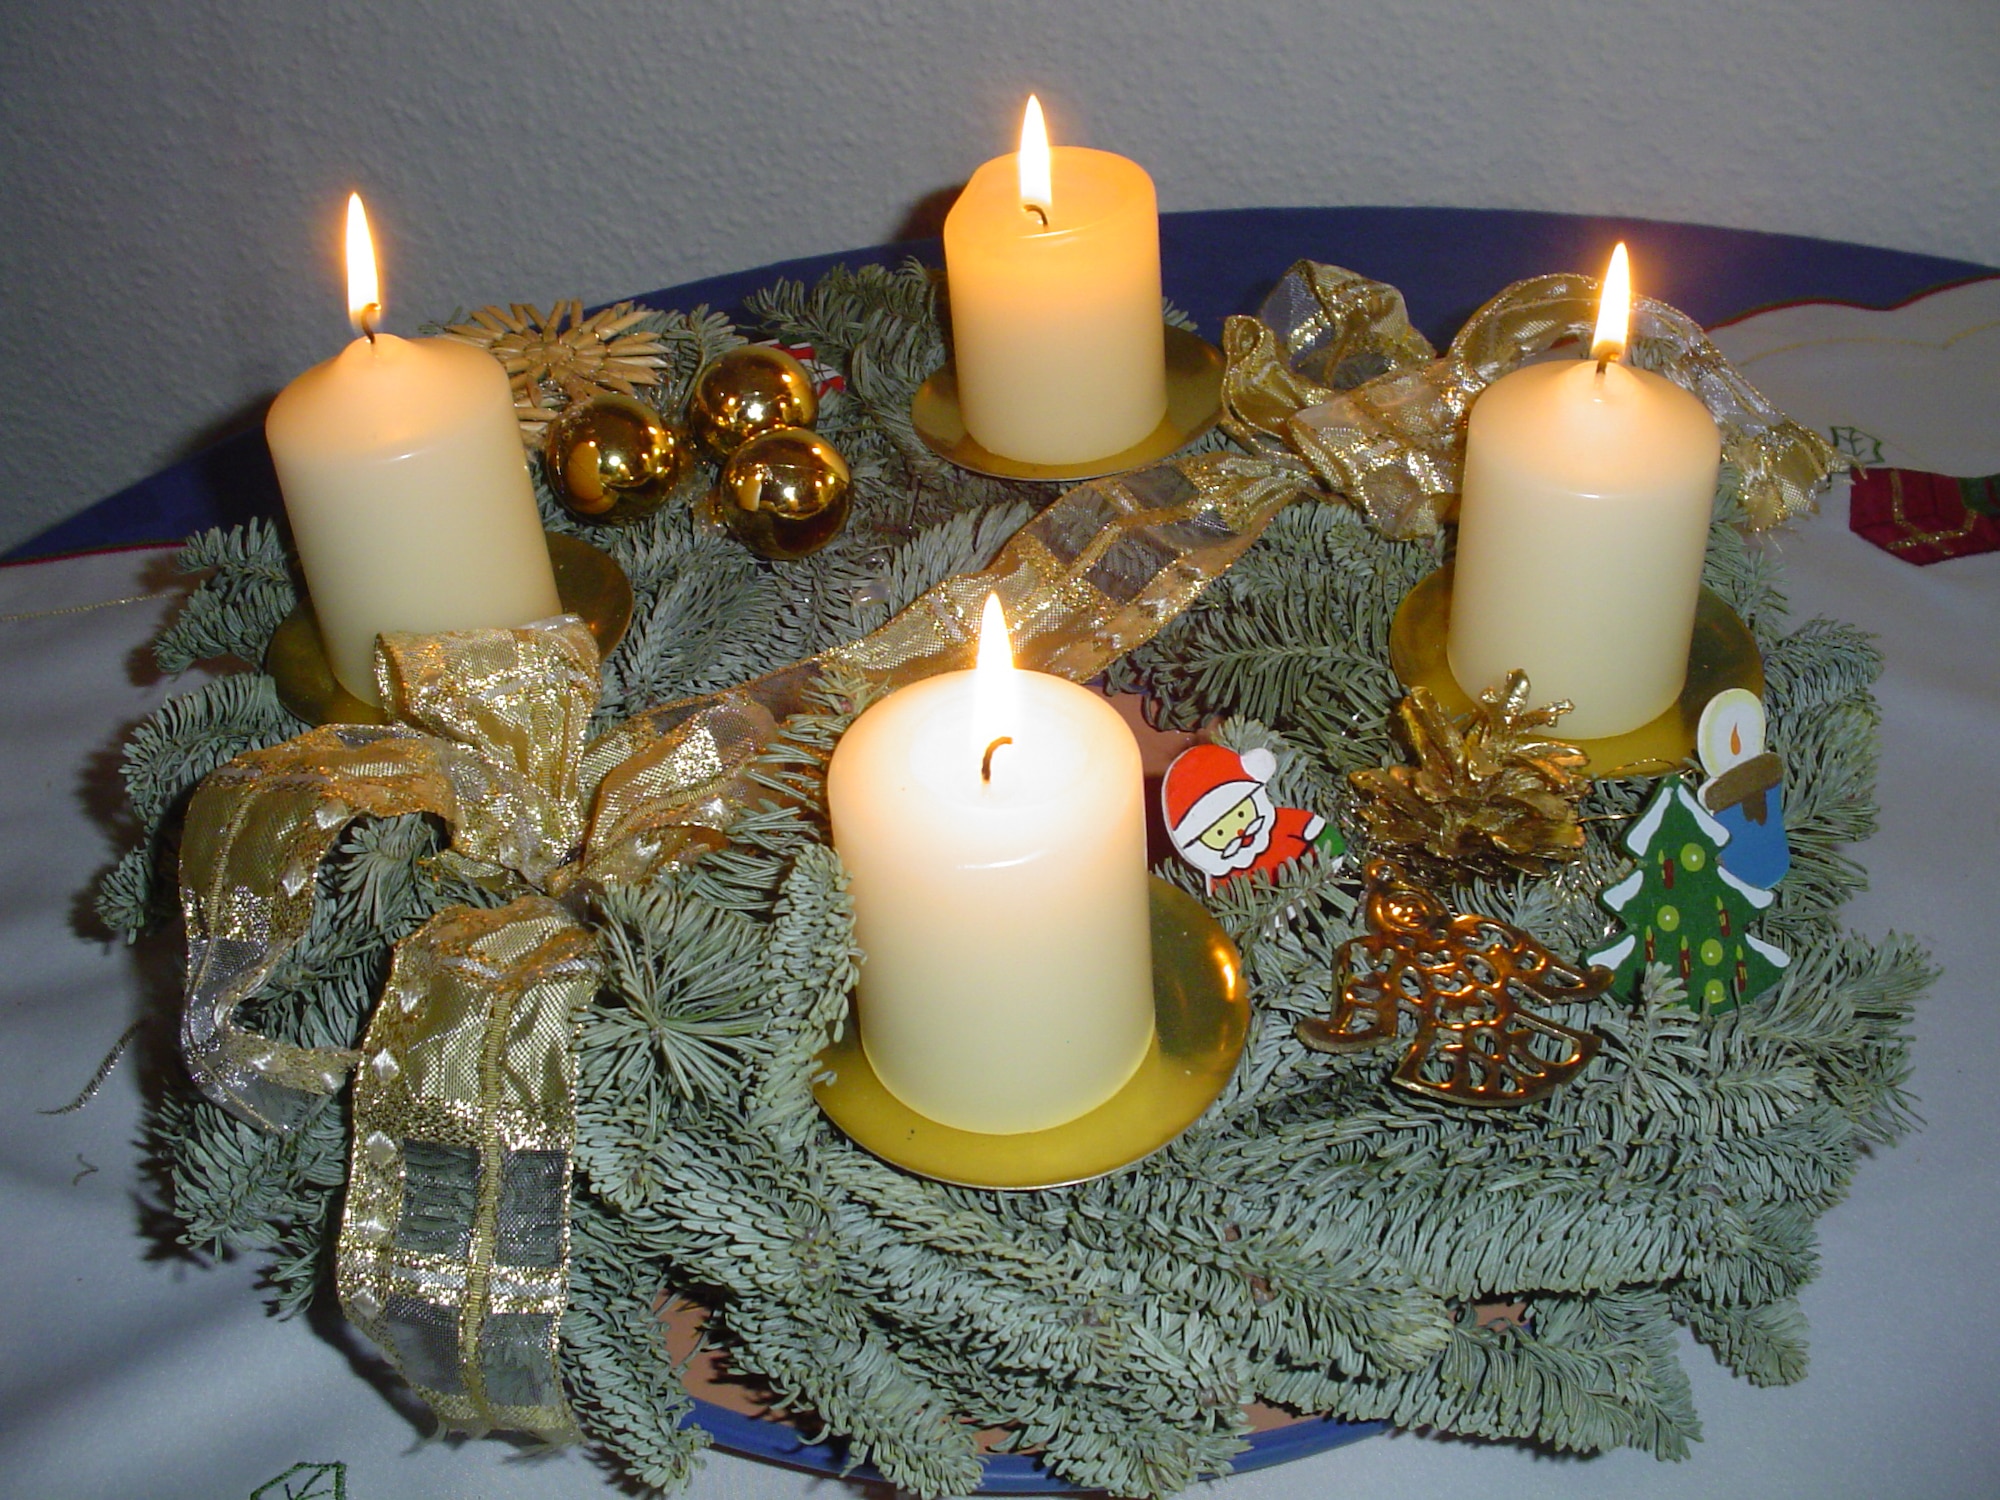 SPANGDAHLEM AIR BASE, Germany -- An Advent wreath is often made of fir branches with four candles and one is lighted every Advent Sunday until all four are burning together then it’s Christmas. The fourth candle is lit Dec. 19. (U.S. Air Force photo/Iris Reiff)